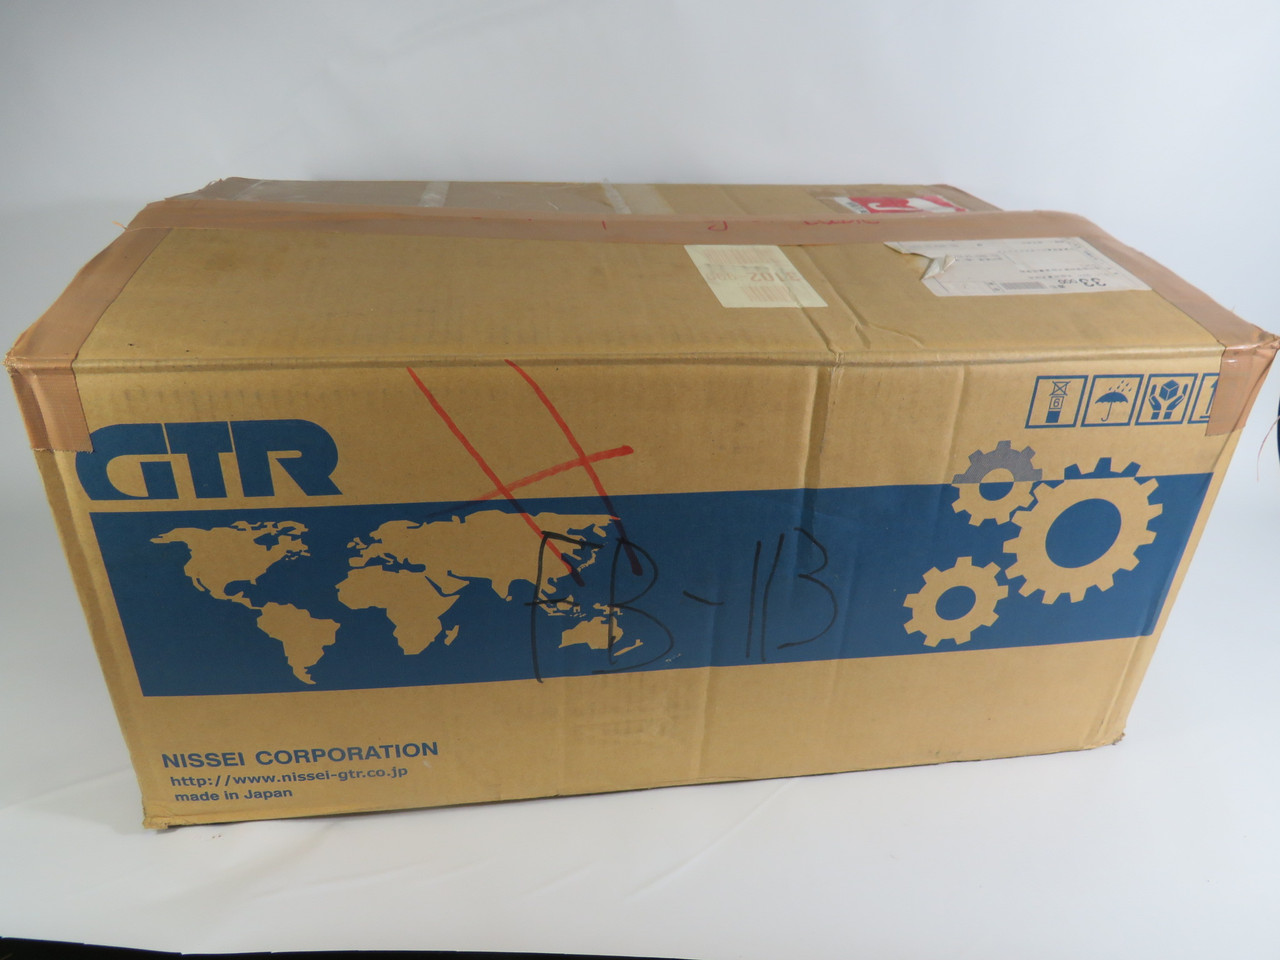 GTR Induction Motor 120:1 0.2kW 1400RPM 200V 3Ph 1.1A 50Hz NEW